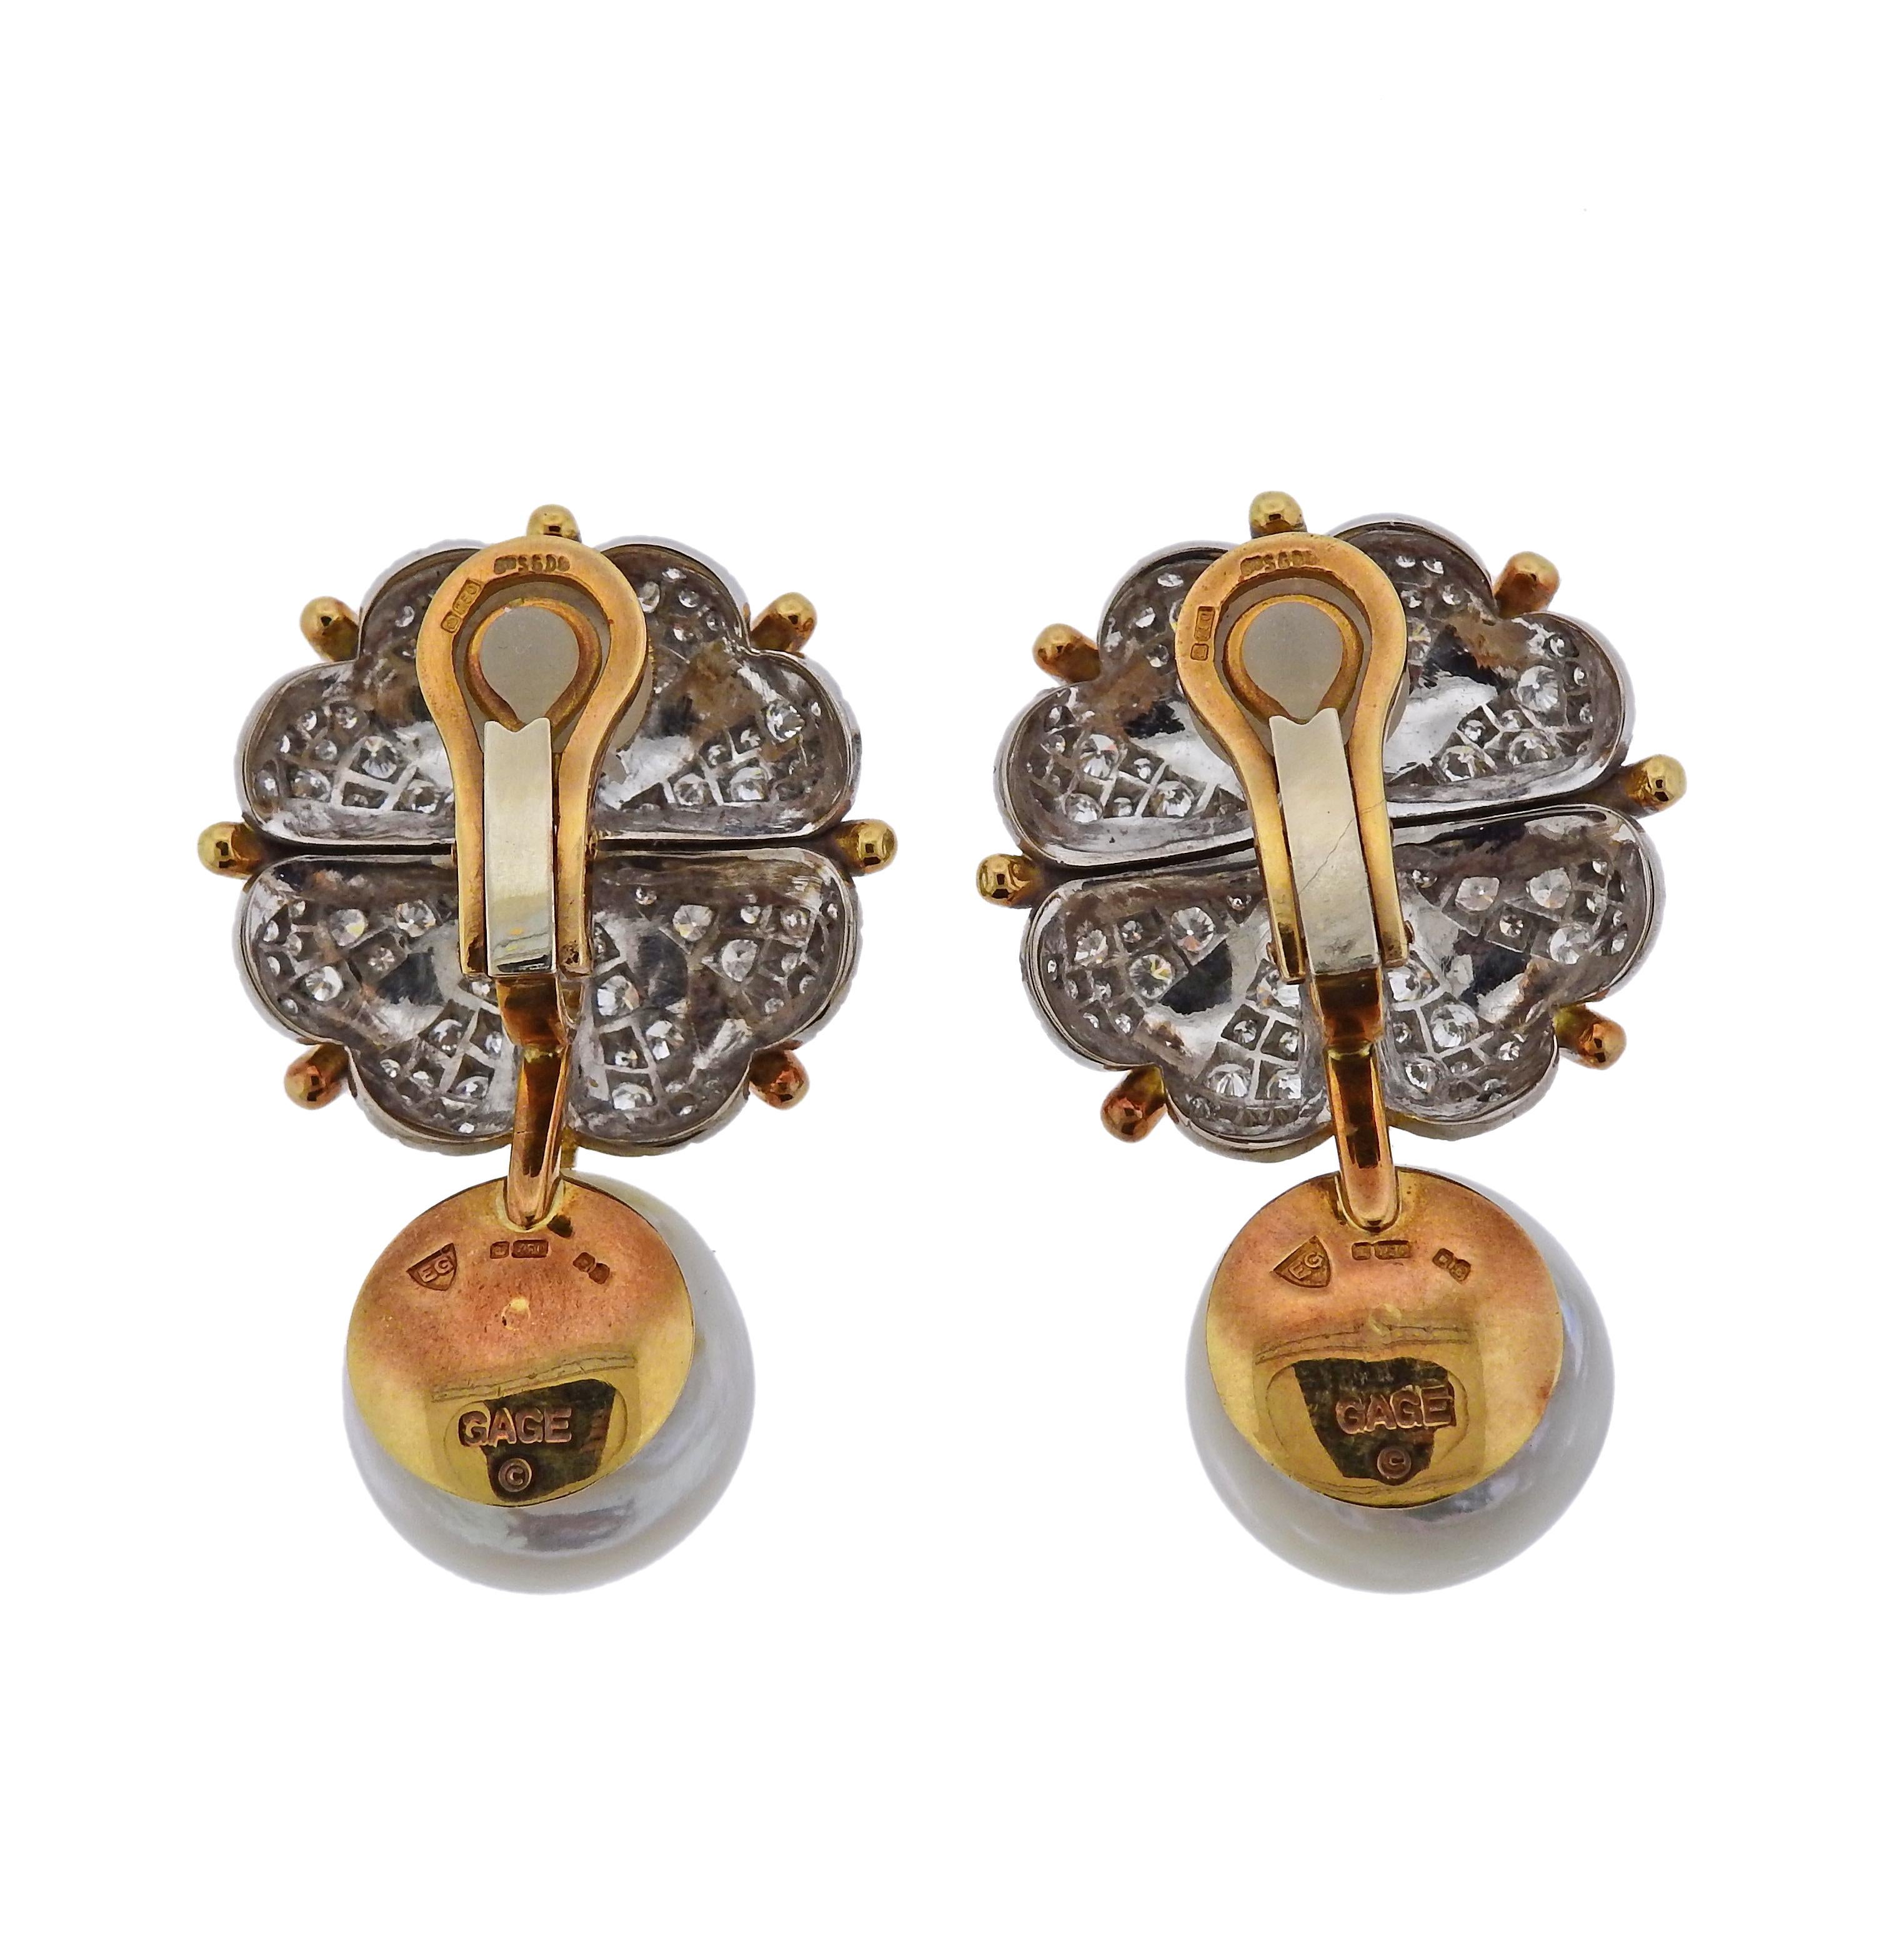 A pair of 18k yellow gold earrings by Elizabeth Gage, set with approx. 2.20ctw in G/VS diamonds and 15.8mm pearls.  Earrings are 42mm x 25mm and weigh 38.8 grams. Marked Gage, EG, 750, English gold assay marks. 